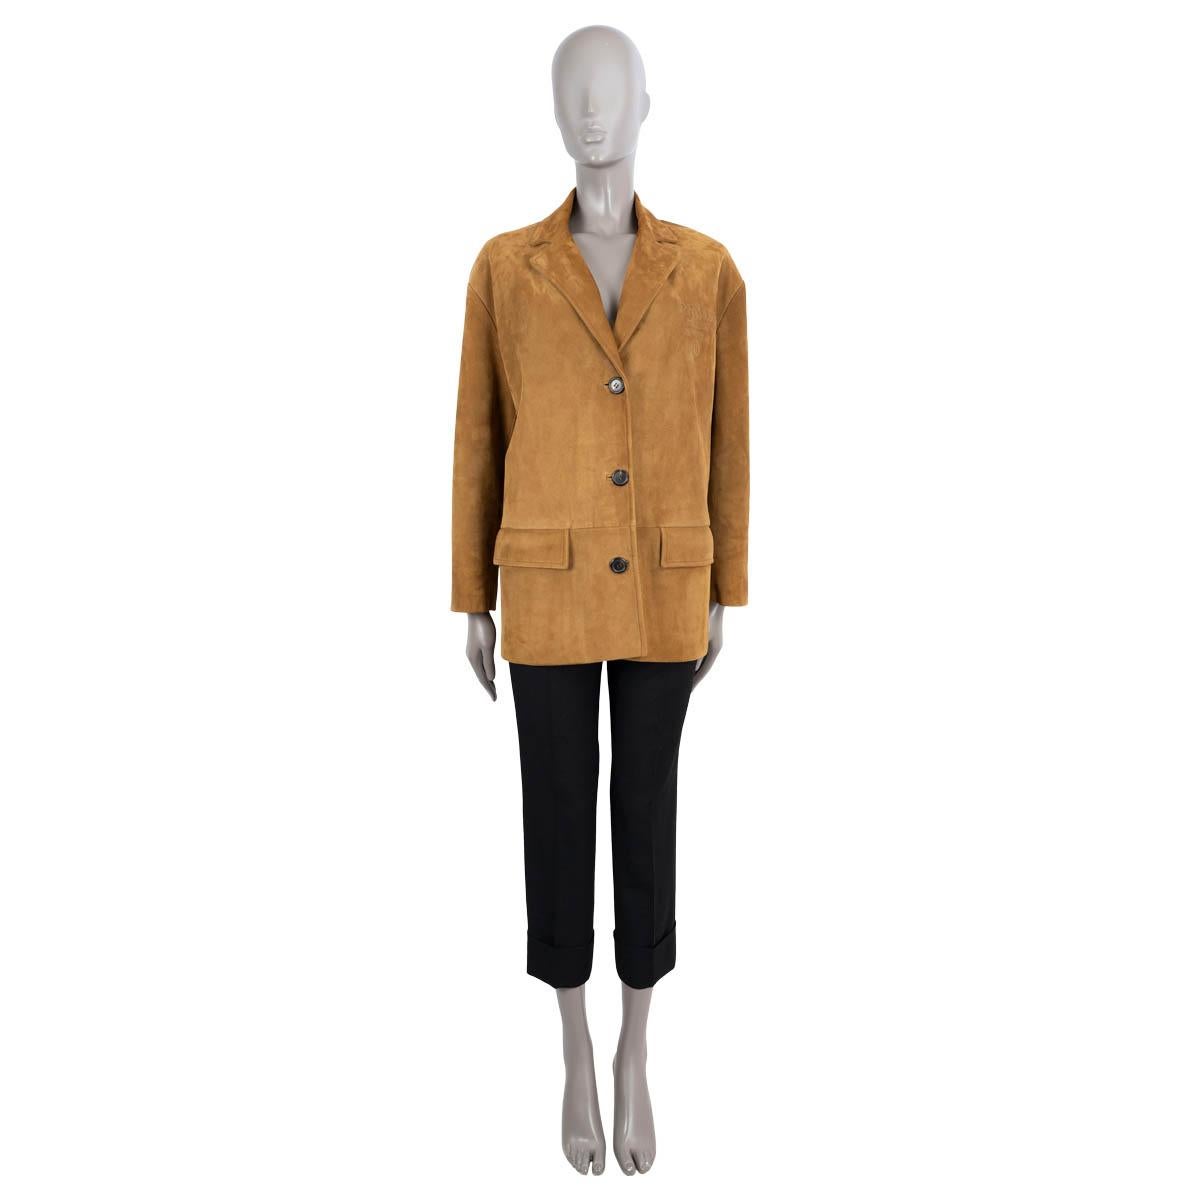 100% authentic Prada single-breasted suede jacket in Rovere brown (oak). Features oversized silhouette, Logo embossing at the chest, notch lapels and two flap pockets on the front. Closes with three buttons and is lined in viscose (100%). Has been